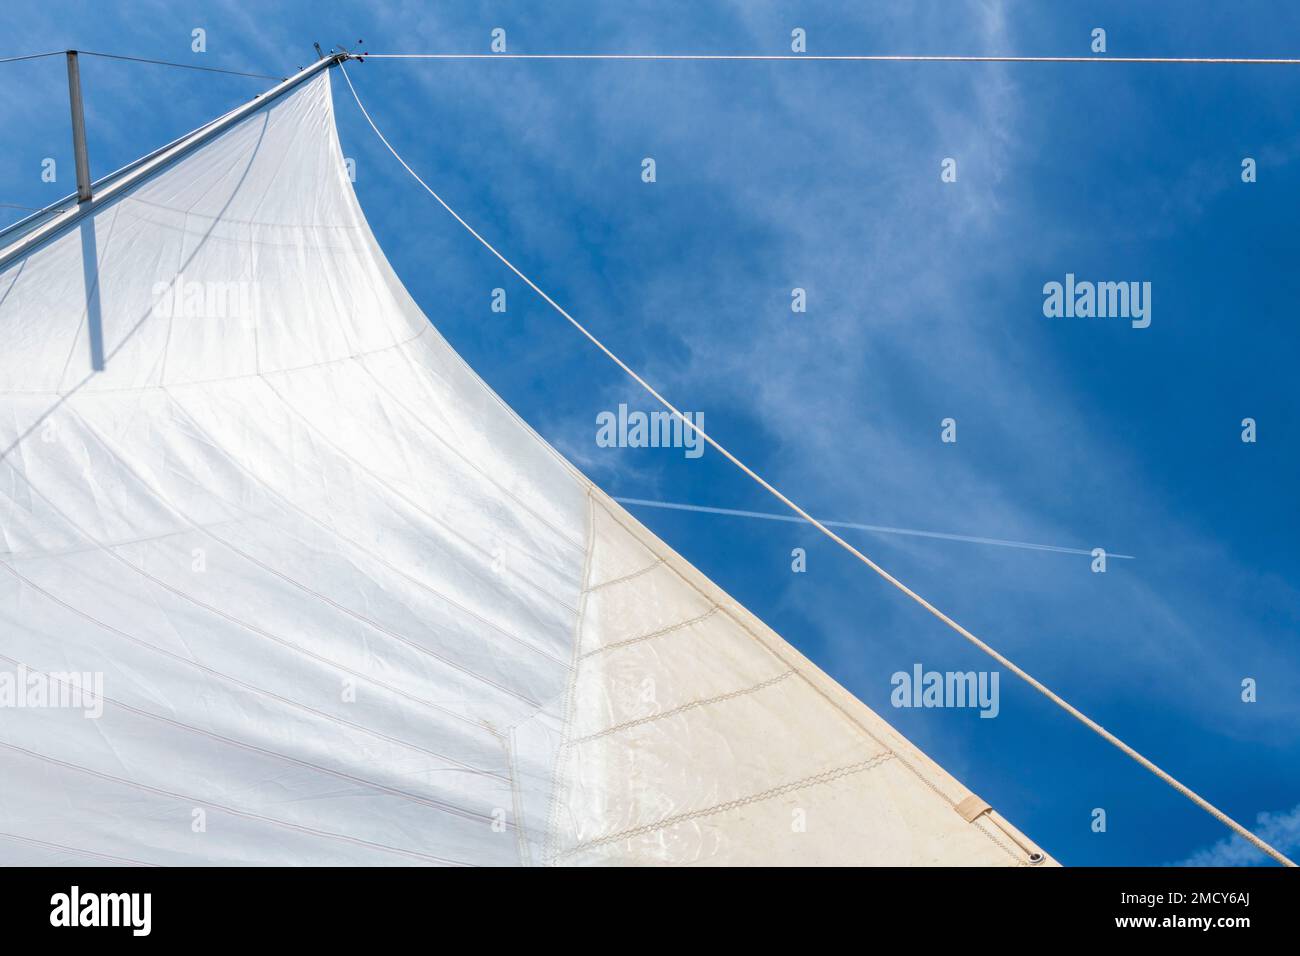 Sail in the sky Stock Photo